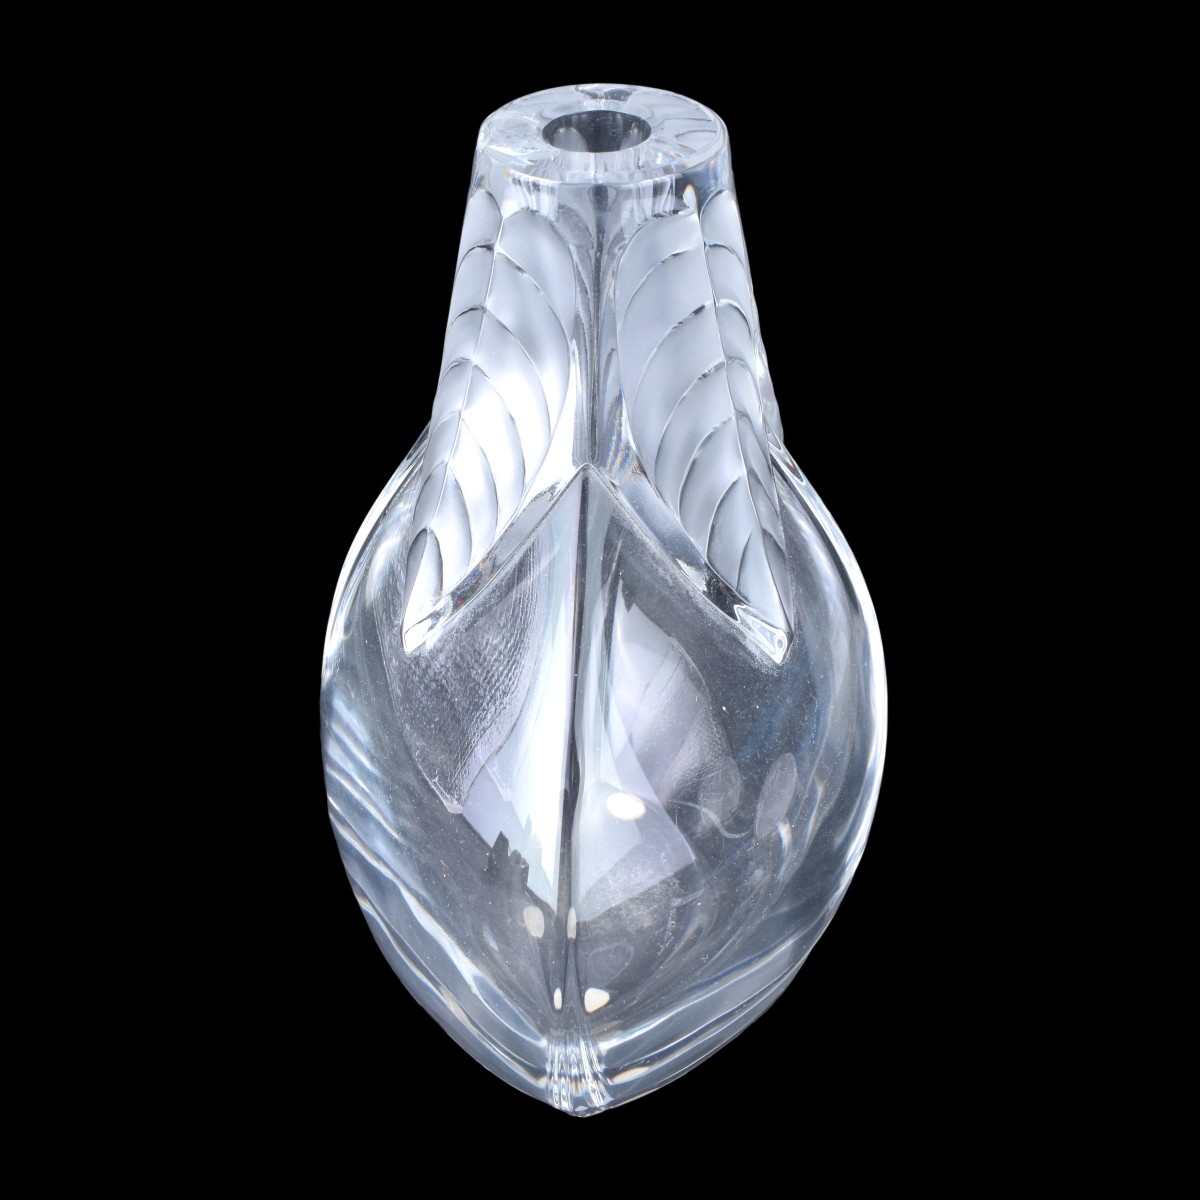 Lalique Crystal Bottle and Lalique Crystal Plaque